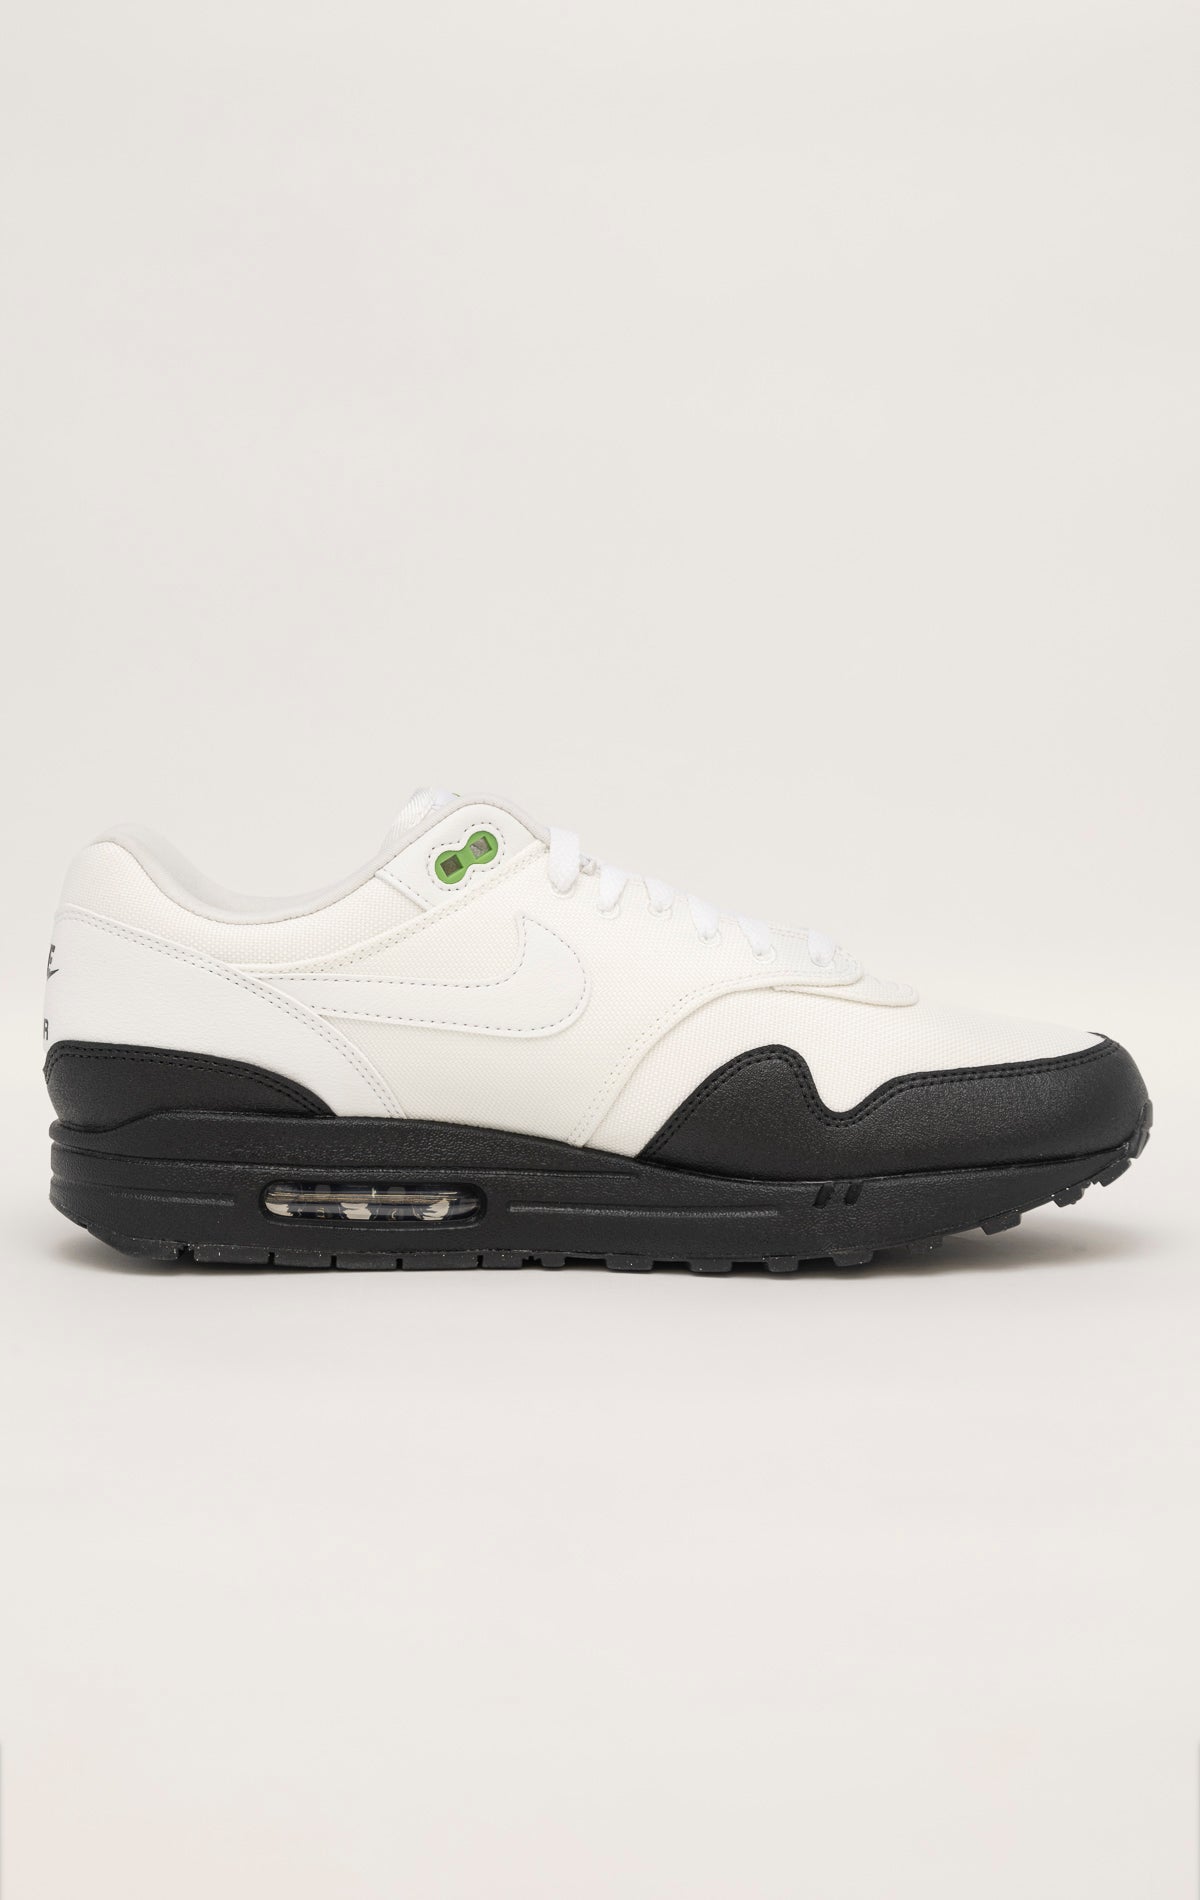 Green and white Nike Air Max 1 SE sneakers with a canvas upper, leather accents, and visible Air unit in the heel and forefoot